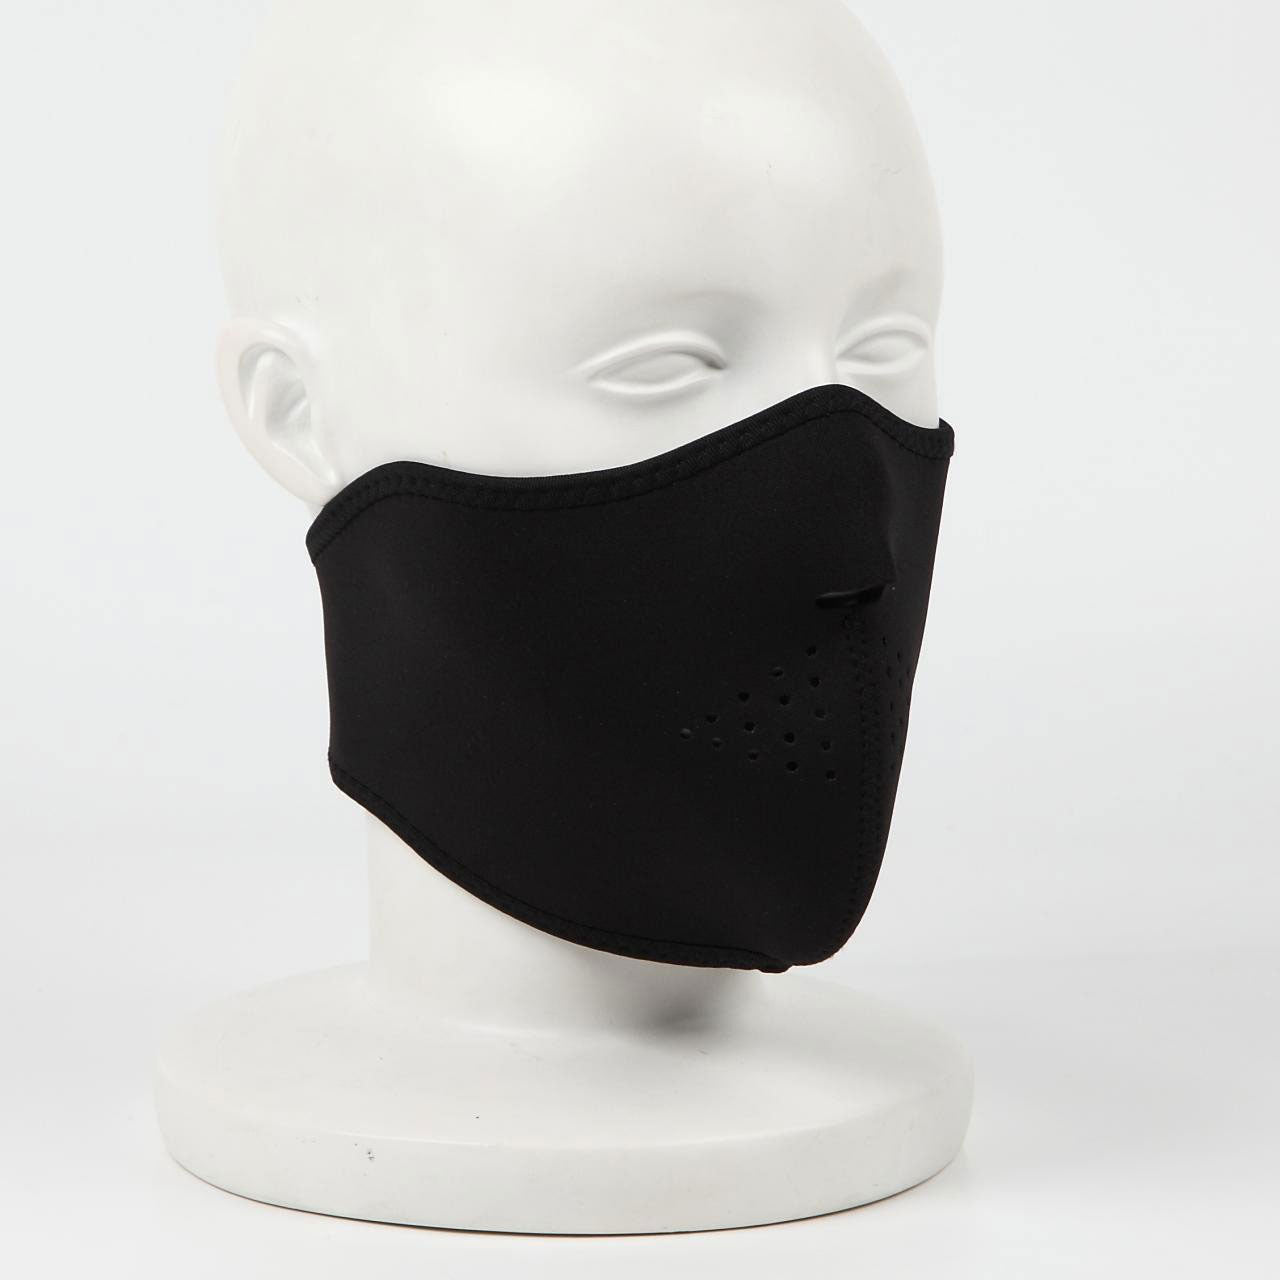 NEO FACEMASK RFM06 SOLID BLACK